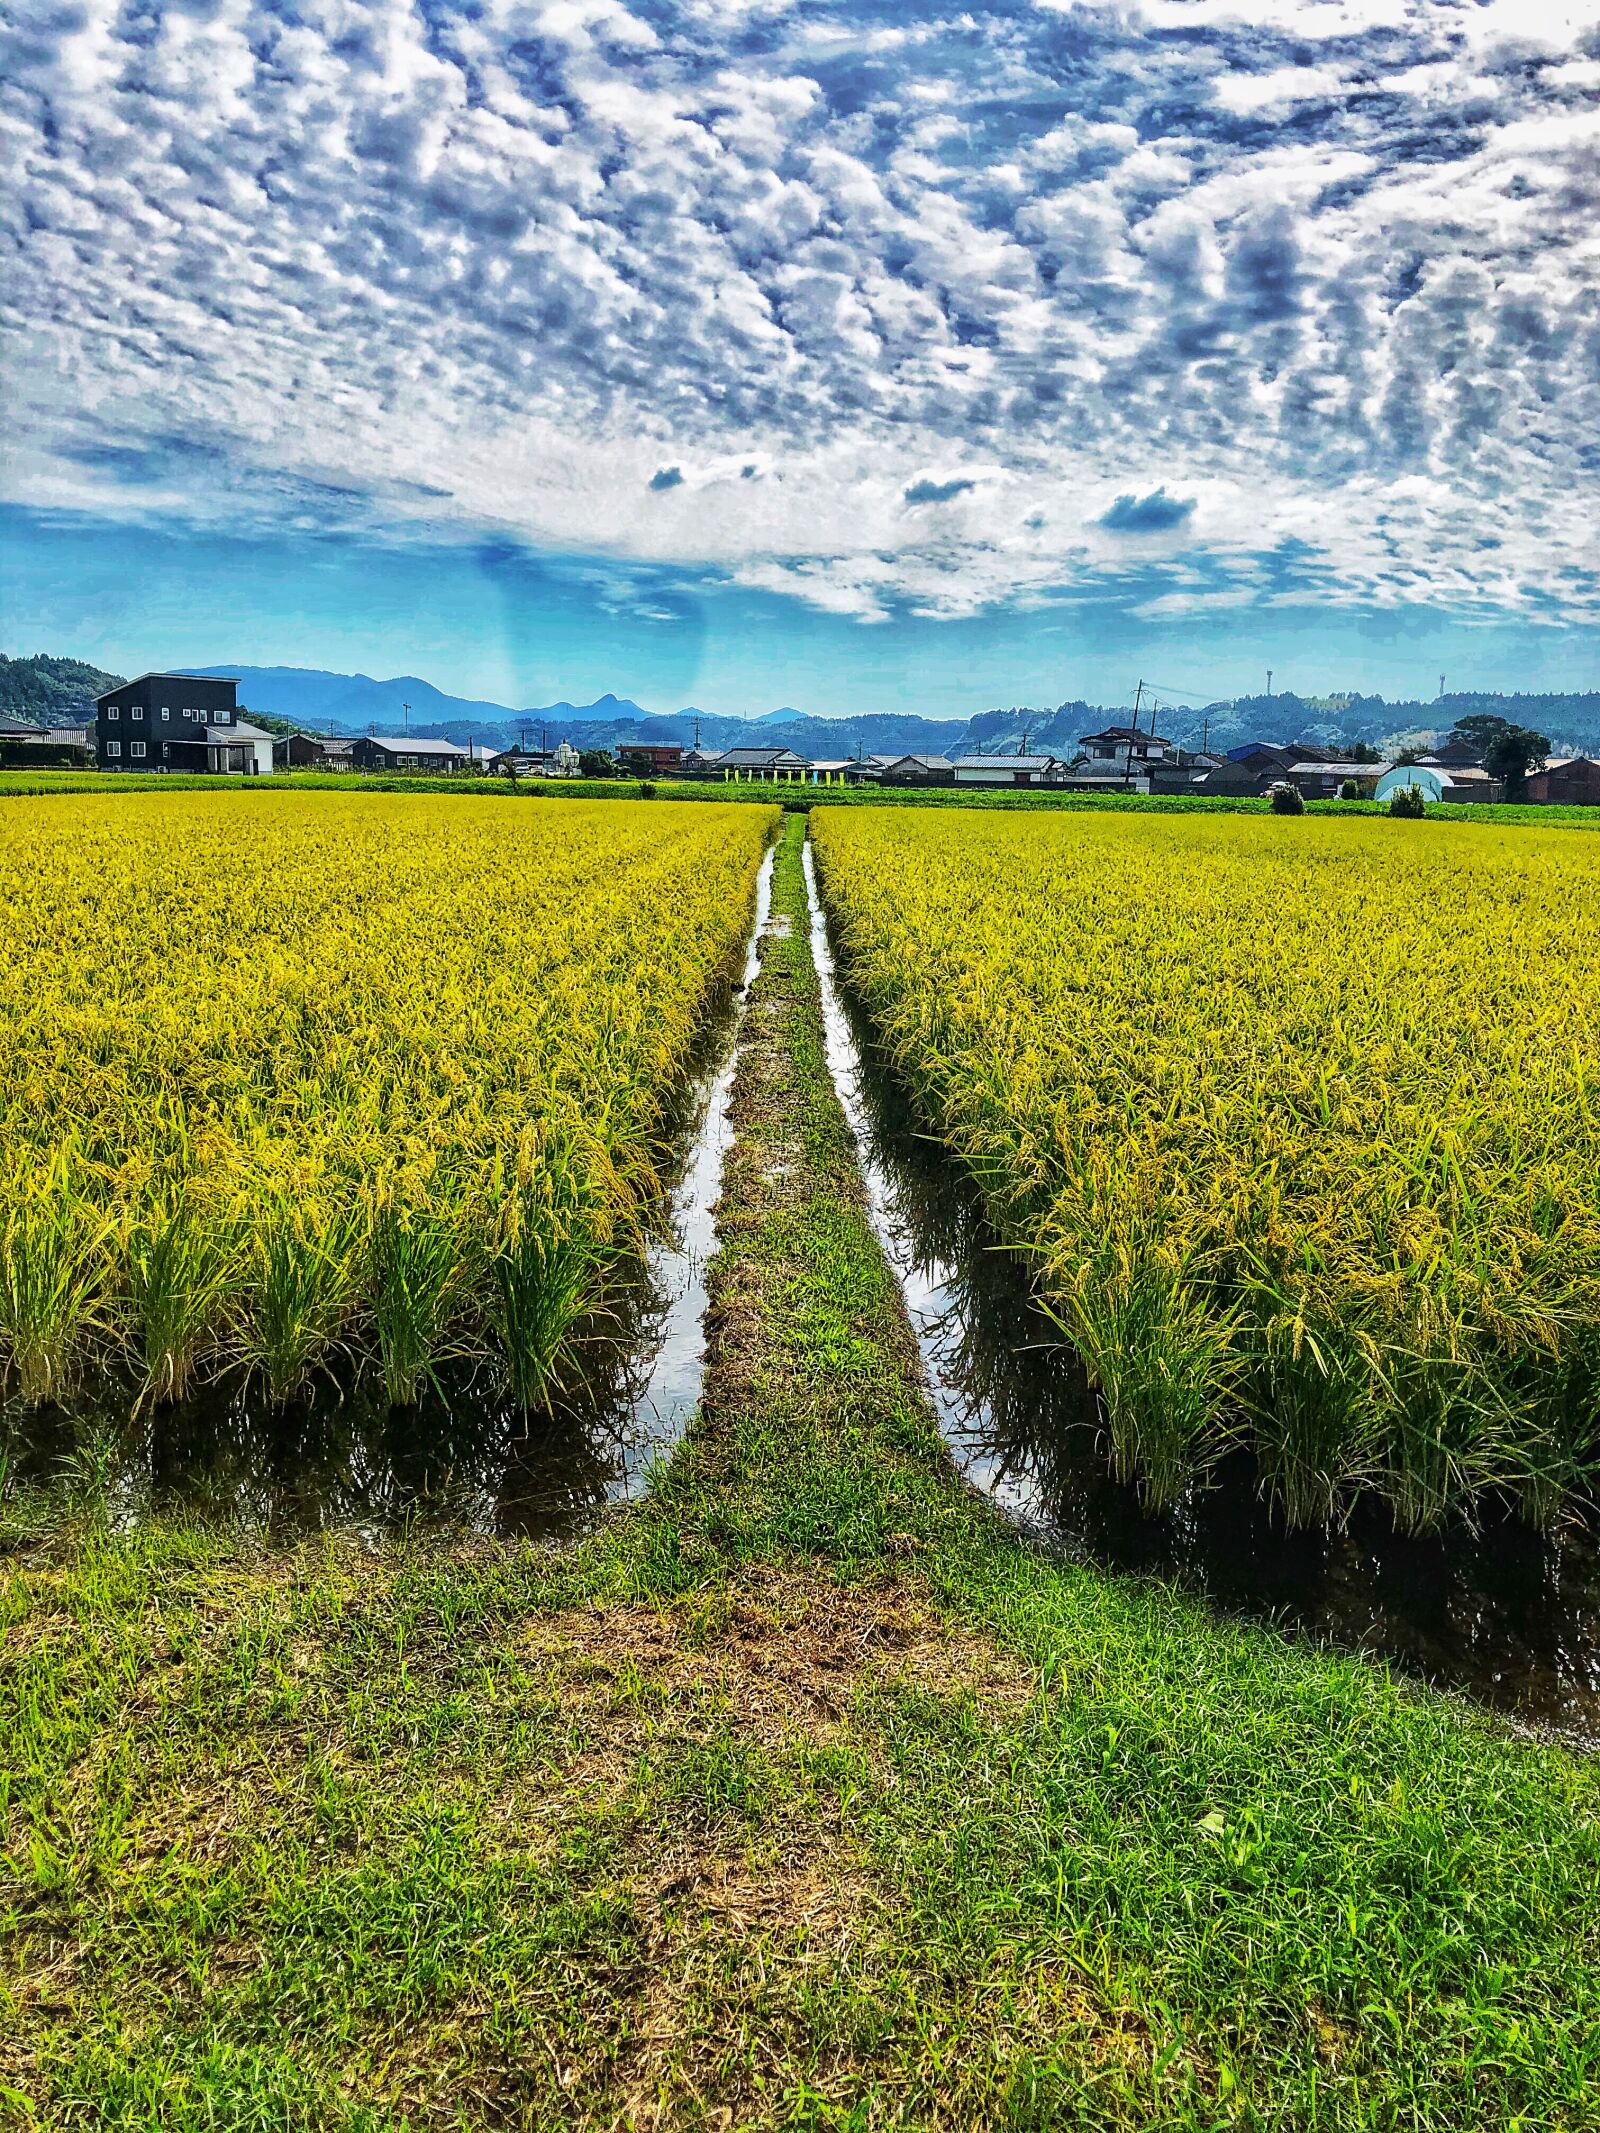 iPhone 8 Plus back dual camera 3.99mm f/1.8 sample photo. Rice fields, japan, landscape photography